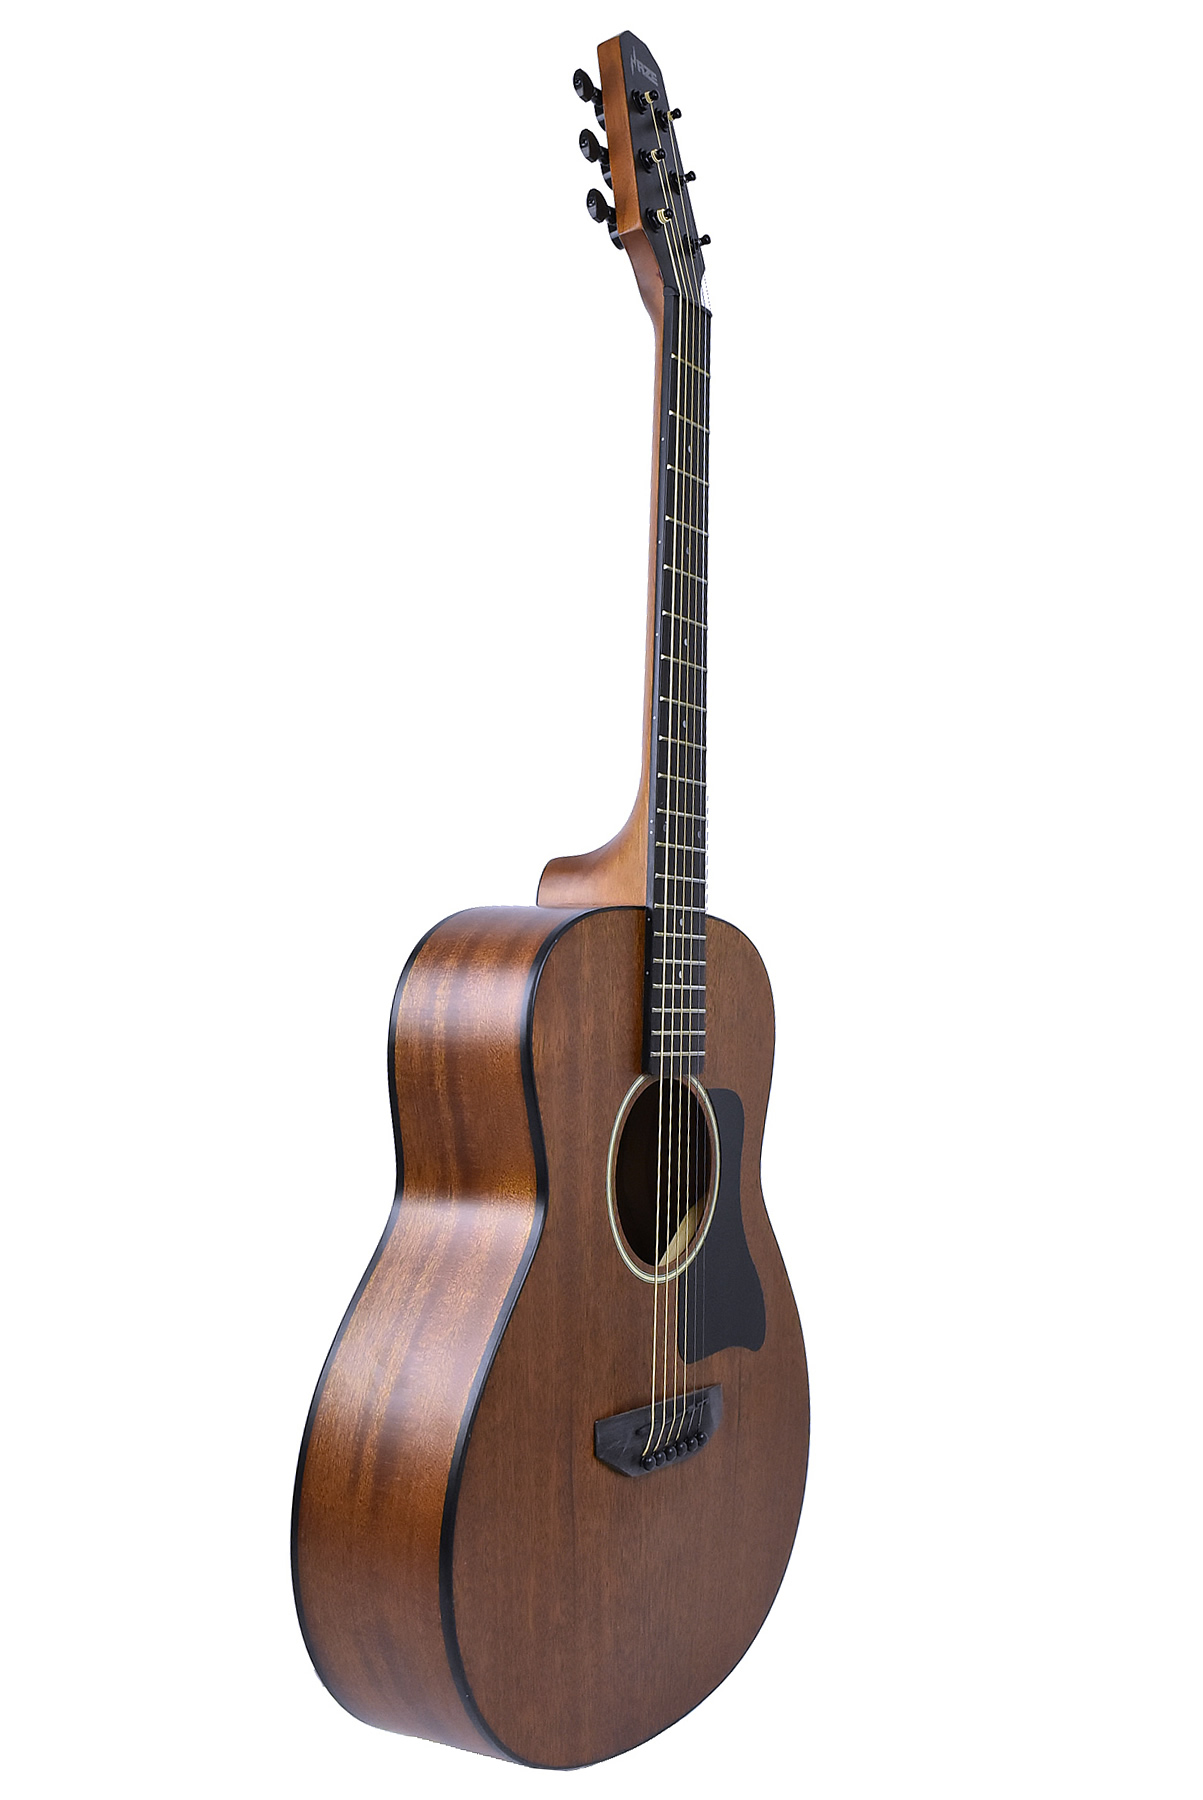 36” Haze All Mahogany Traveler Series Acoustic Guitar, Arched-Back